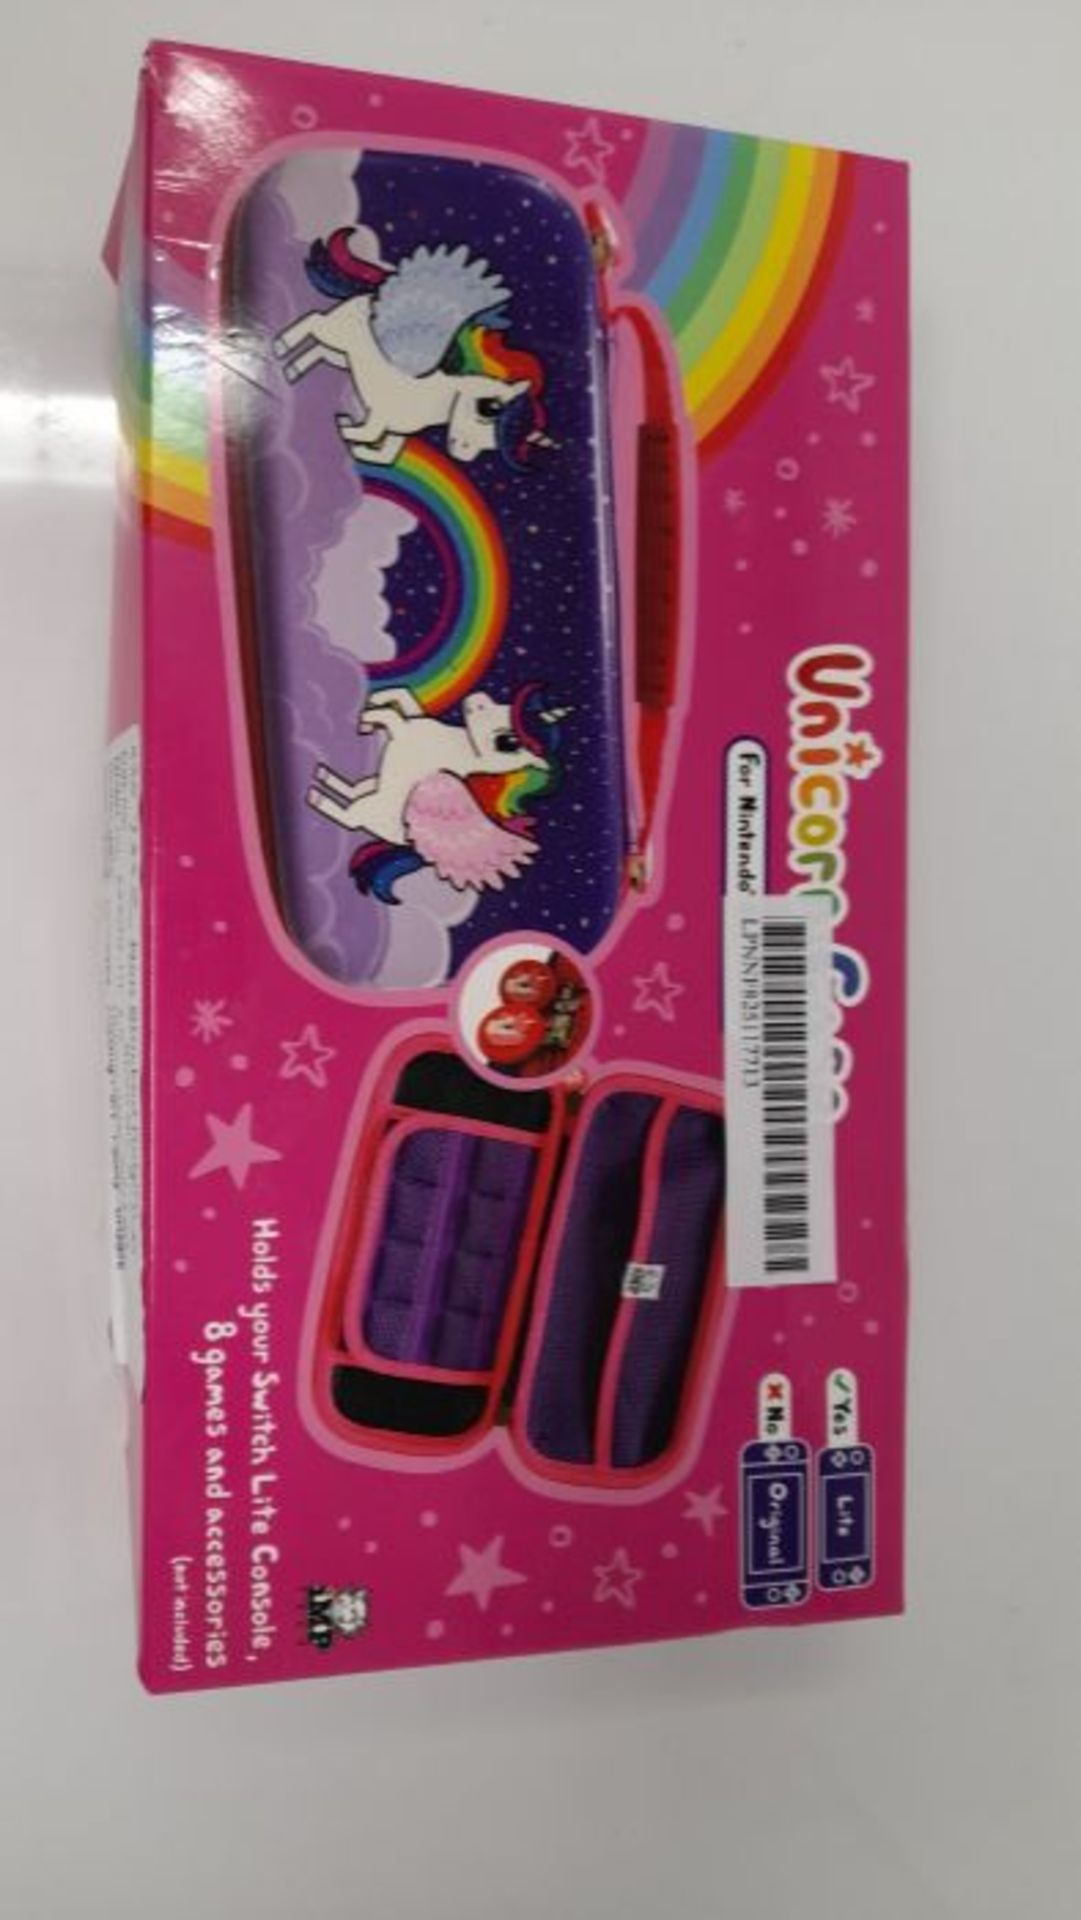 Unicorn Protective Carry and Storage Case (Nintendo Switch Lite) - Image 2 of 3